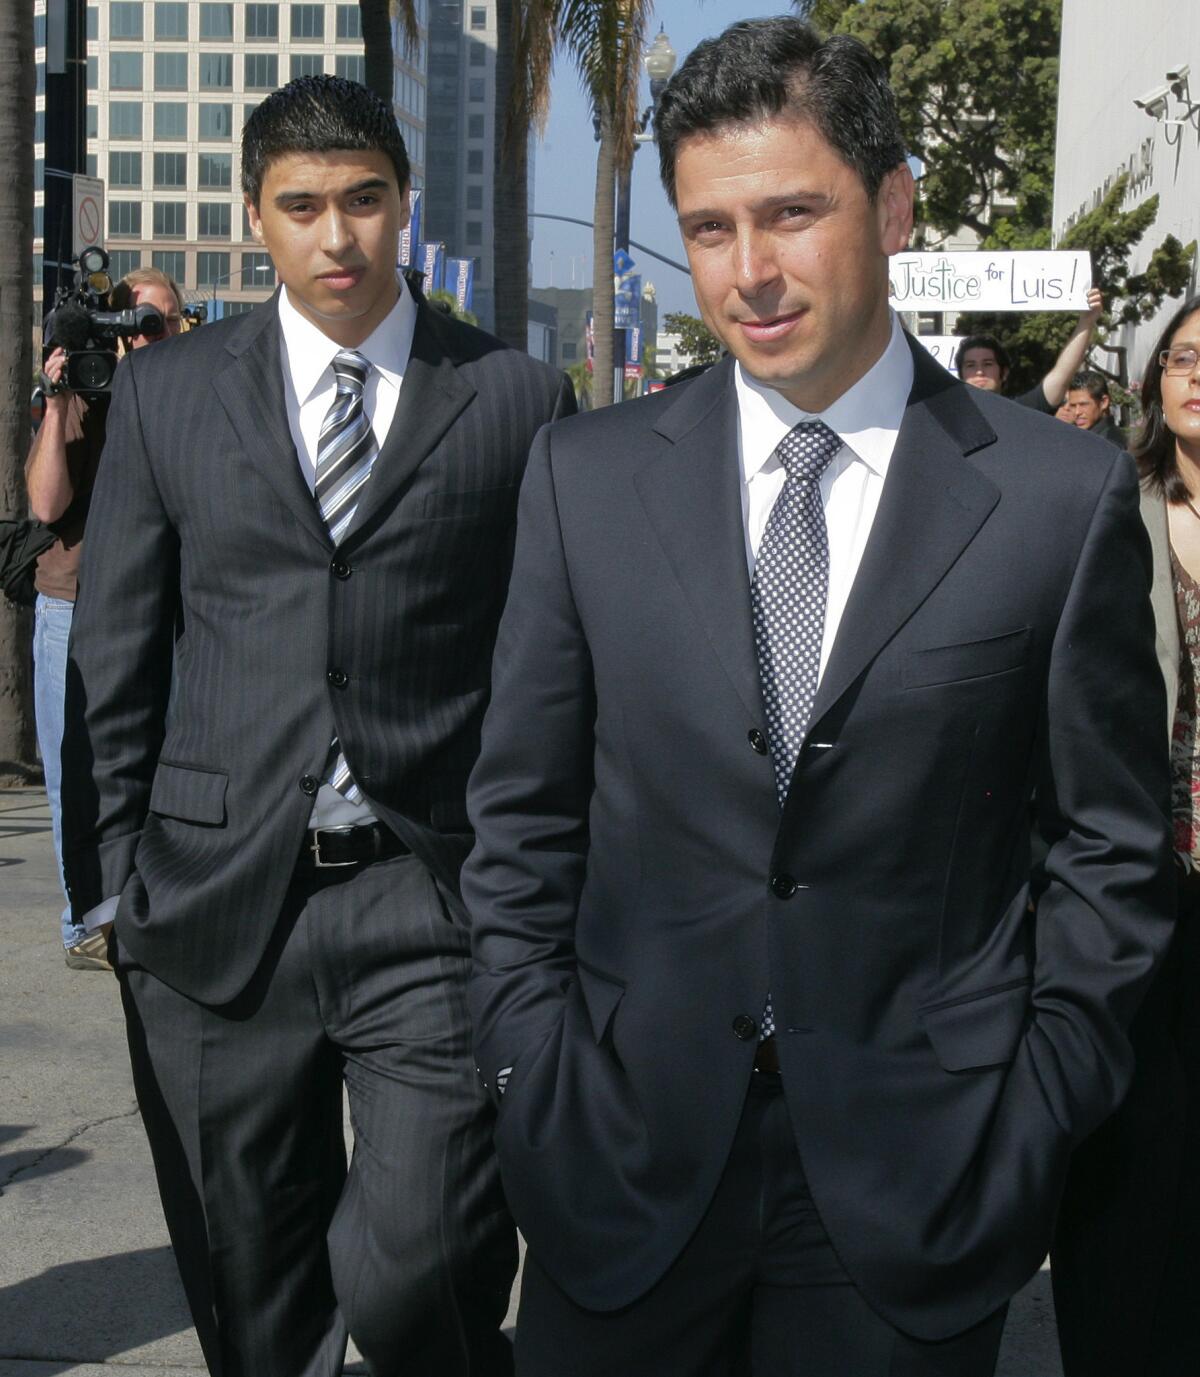 Former Assembly Speaker Fabian Nuñez, right, and his son Esteban Nuñez leave a hearing in Superior Court in San Diego on May 18, 2009.